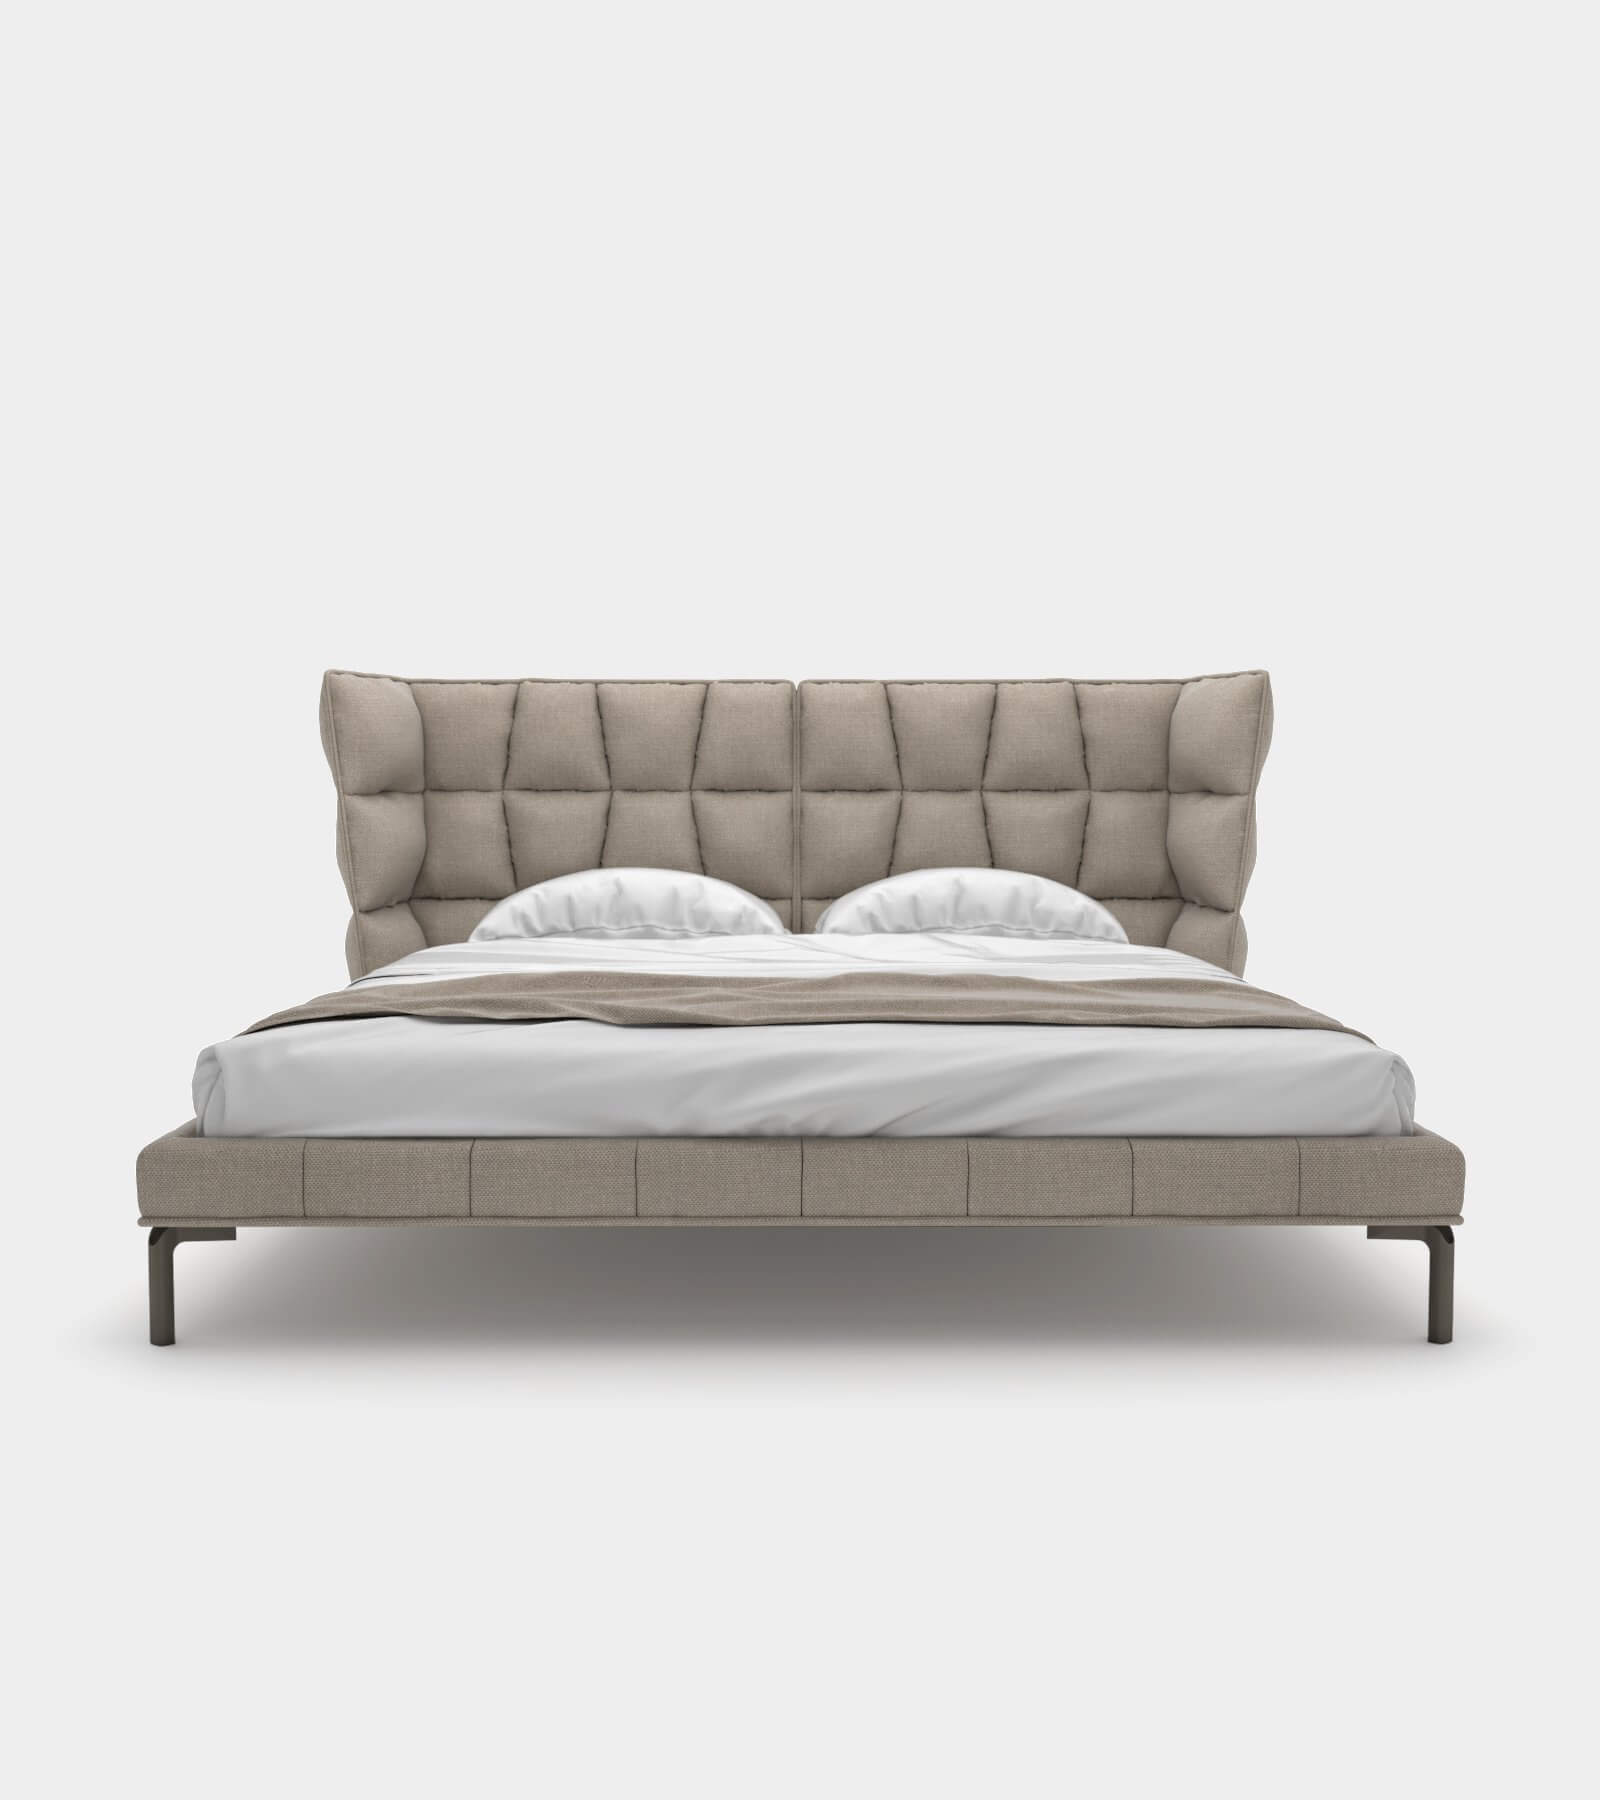 Modern bed with upholstered headboard 3D Model